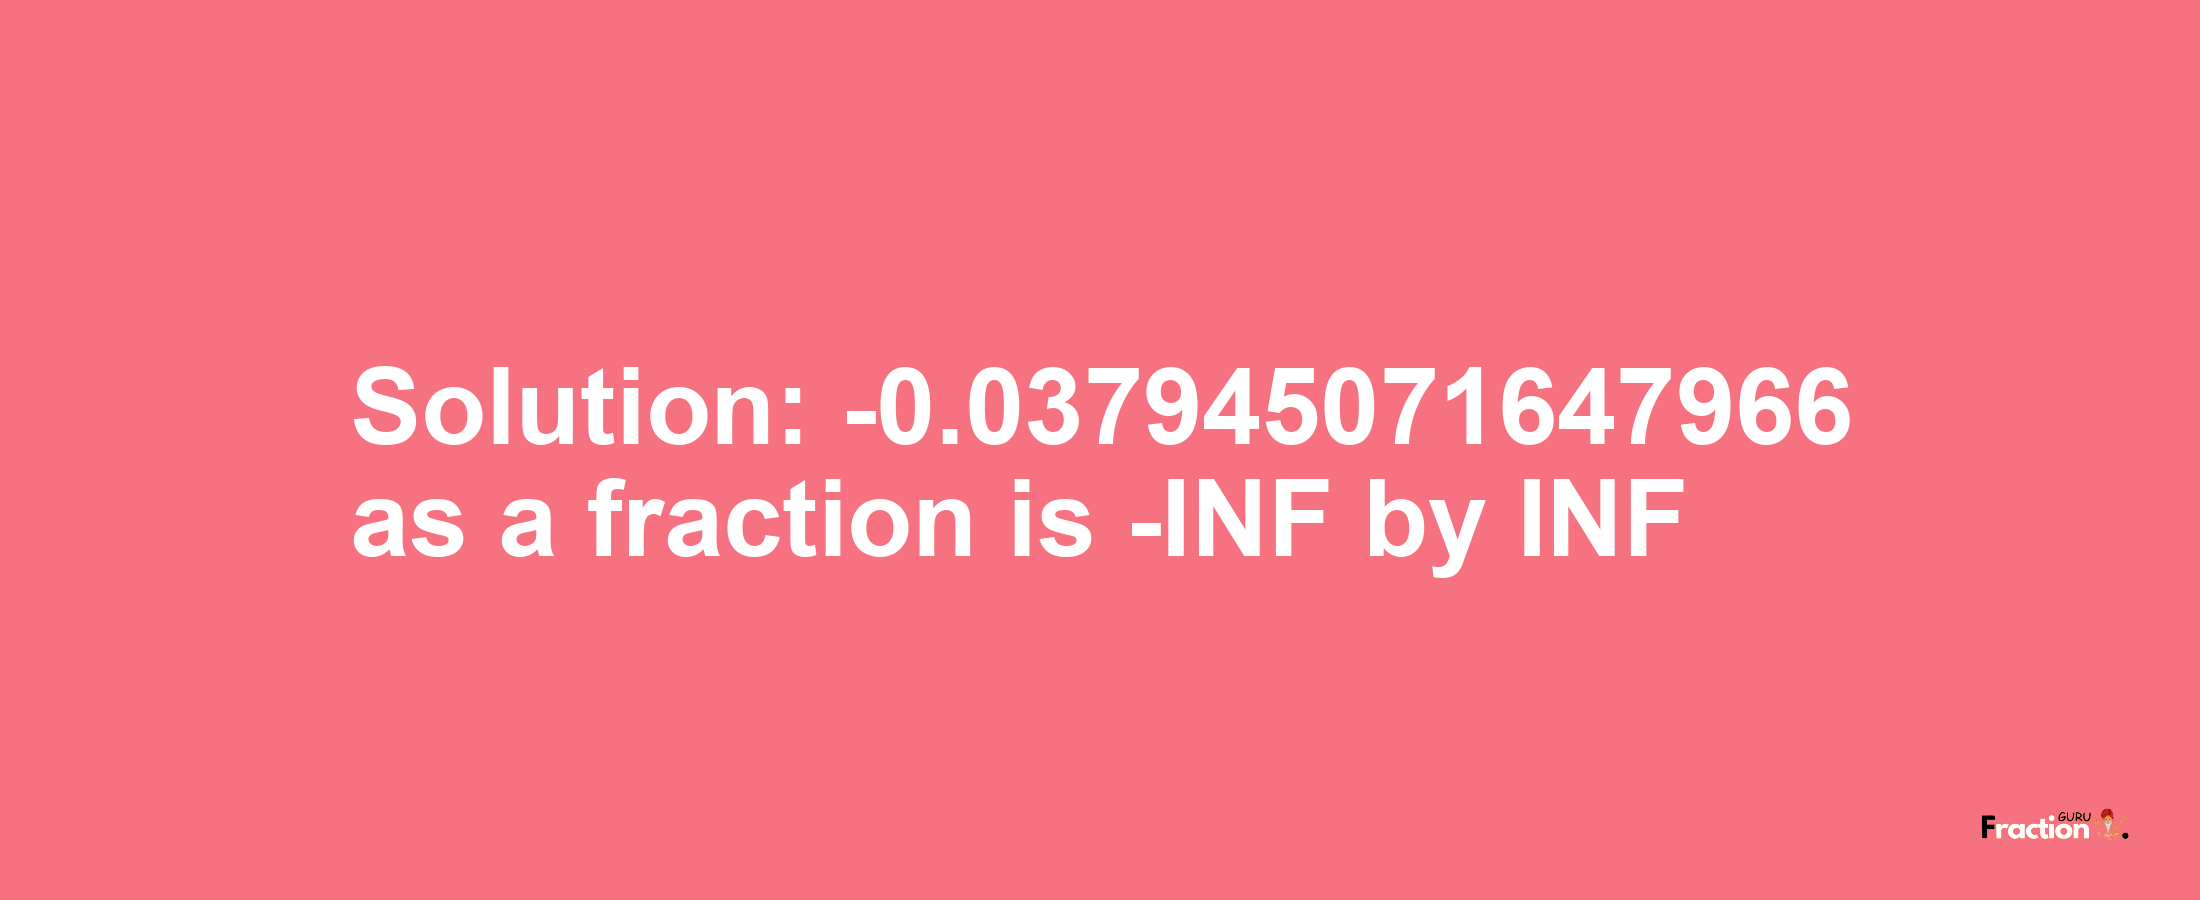 Solution:-0.037945071647966 as a fraction is -INF/INF